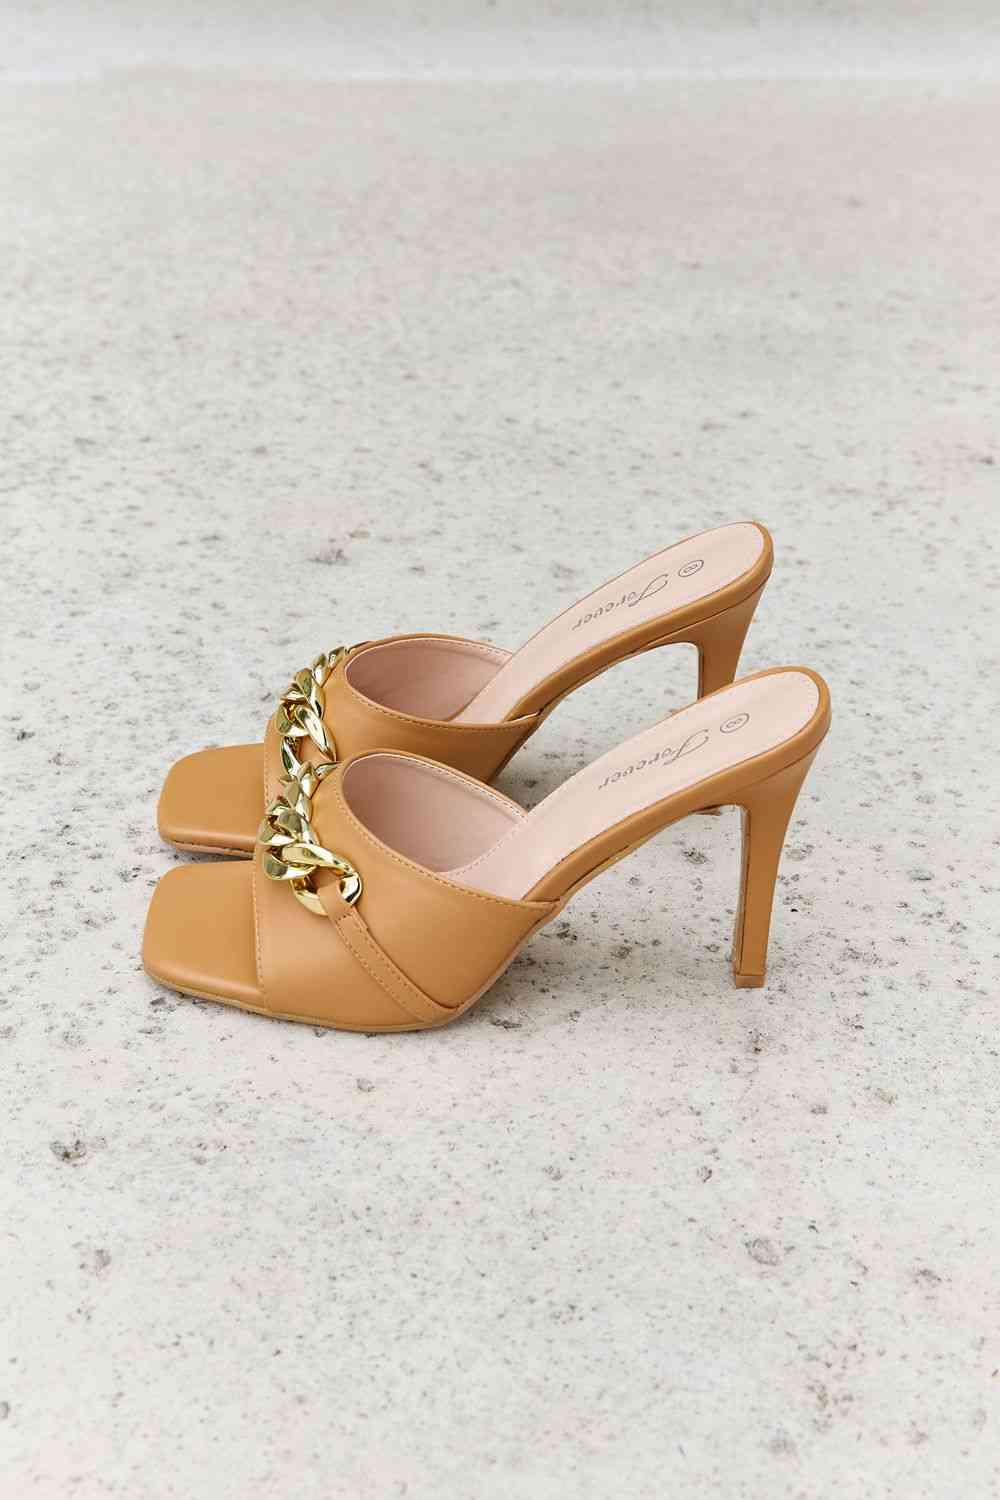 Single Strap Chain Detail Mule Heels in Tan - Accessories - Shoes - 8 - 2024